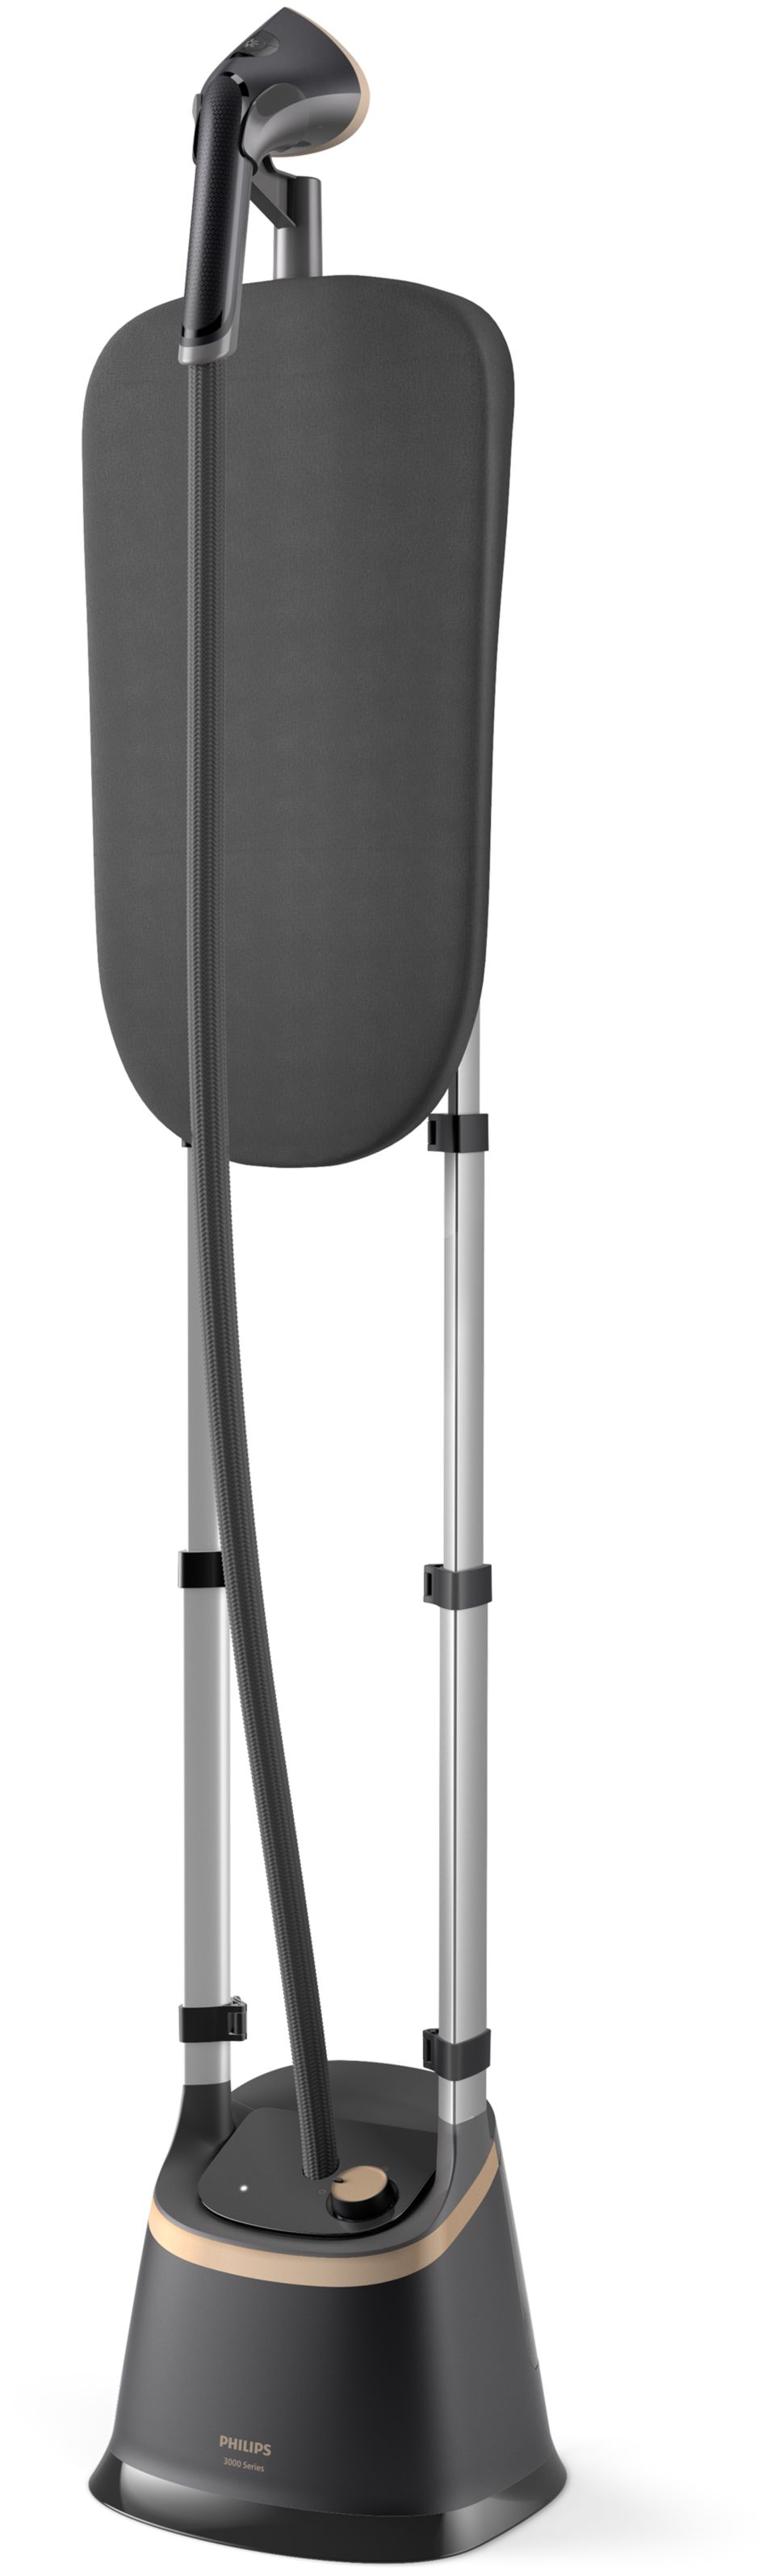 iF Design - Philips Stand Steamer 3000 Series